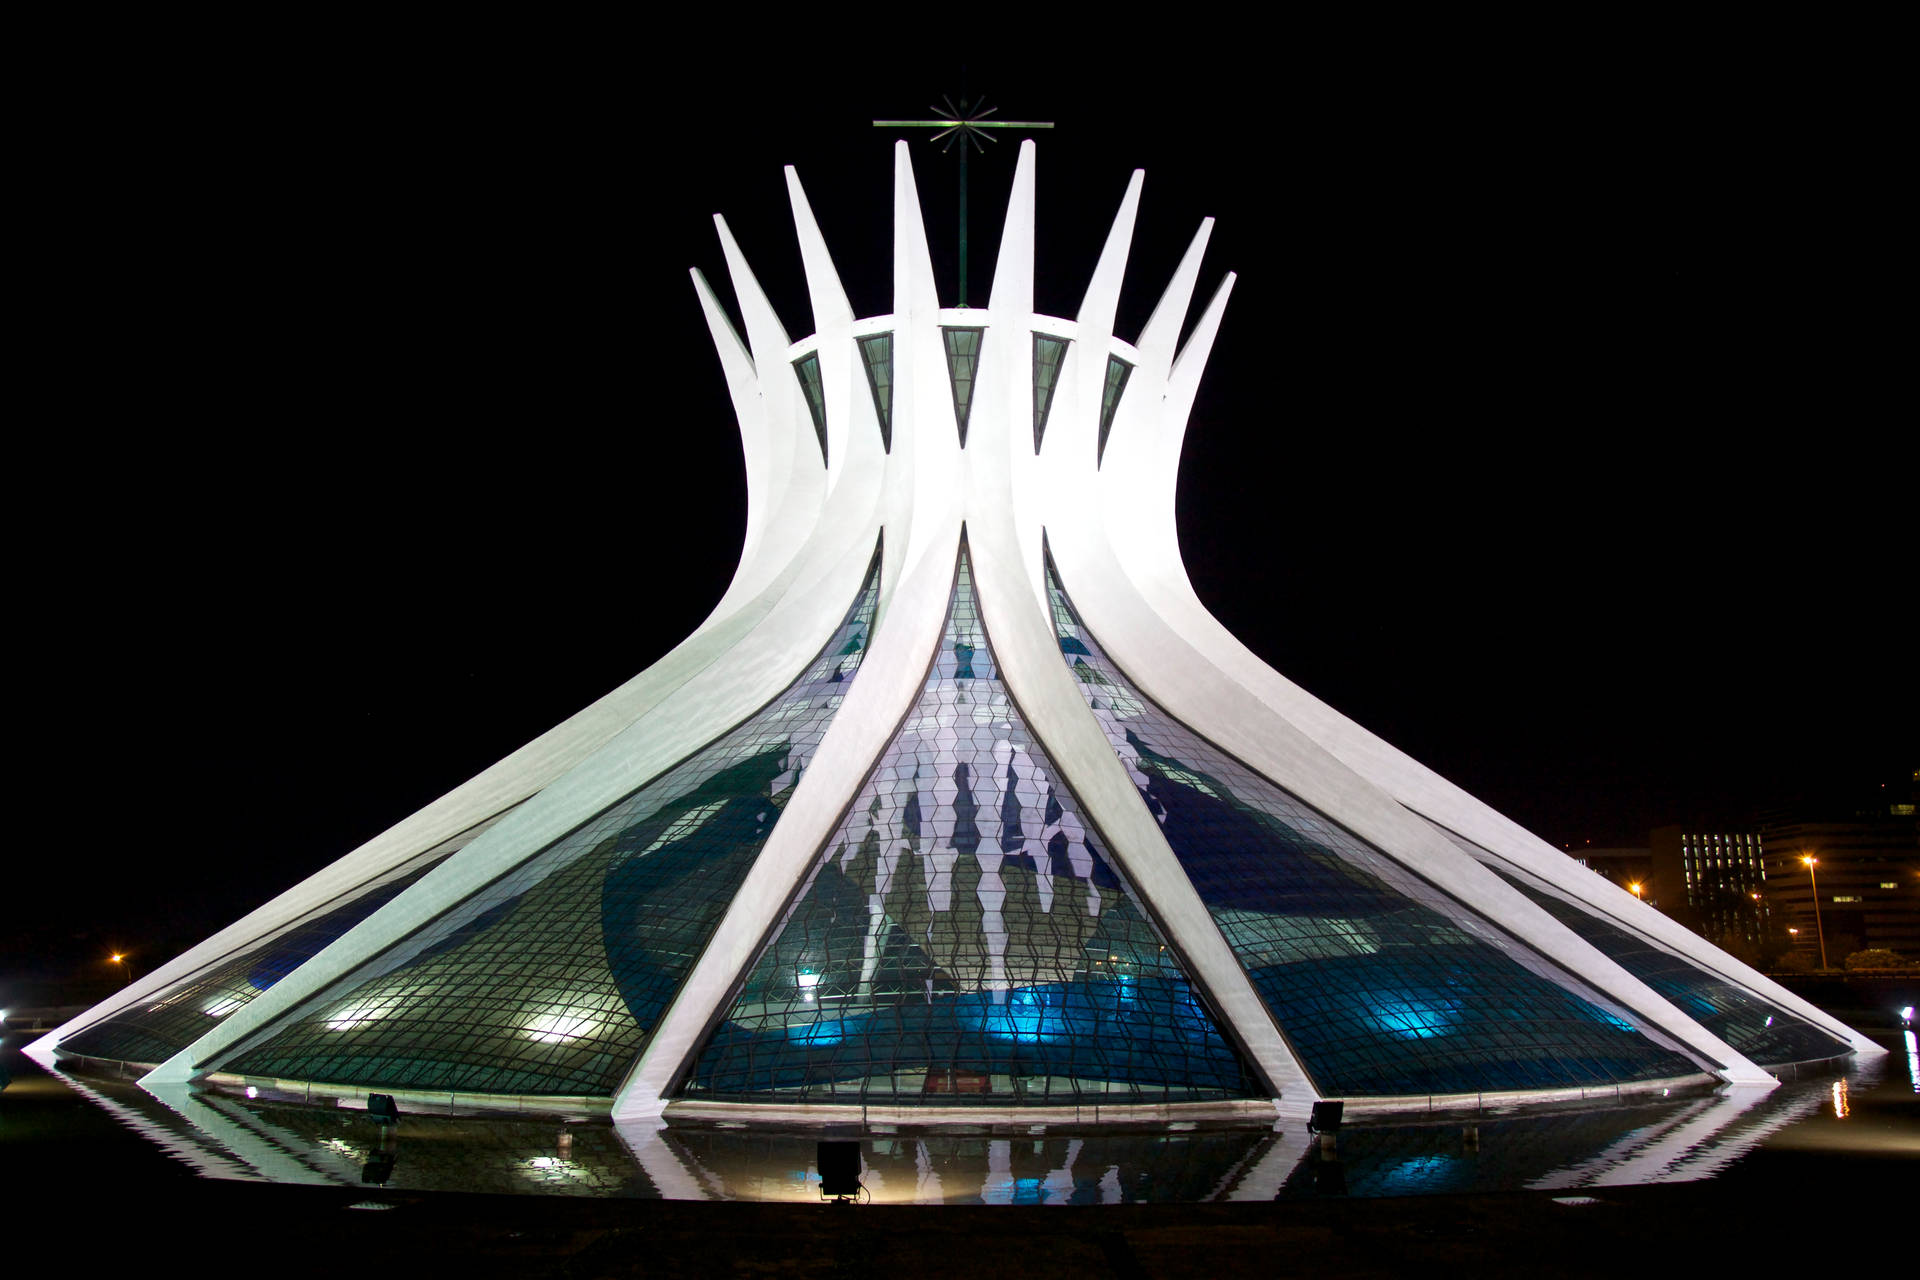 Caption: The Artistic Metropolitan Cathedral In Brazil Background